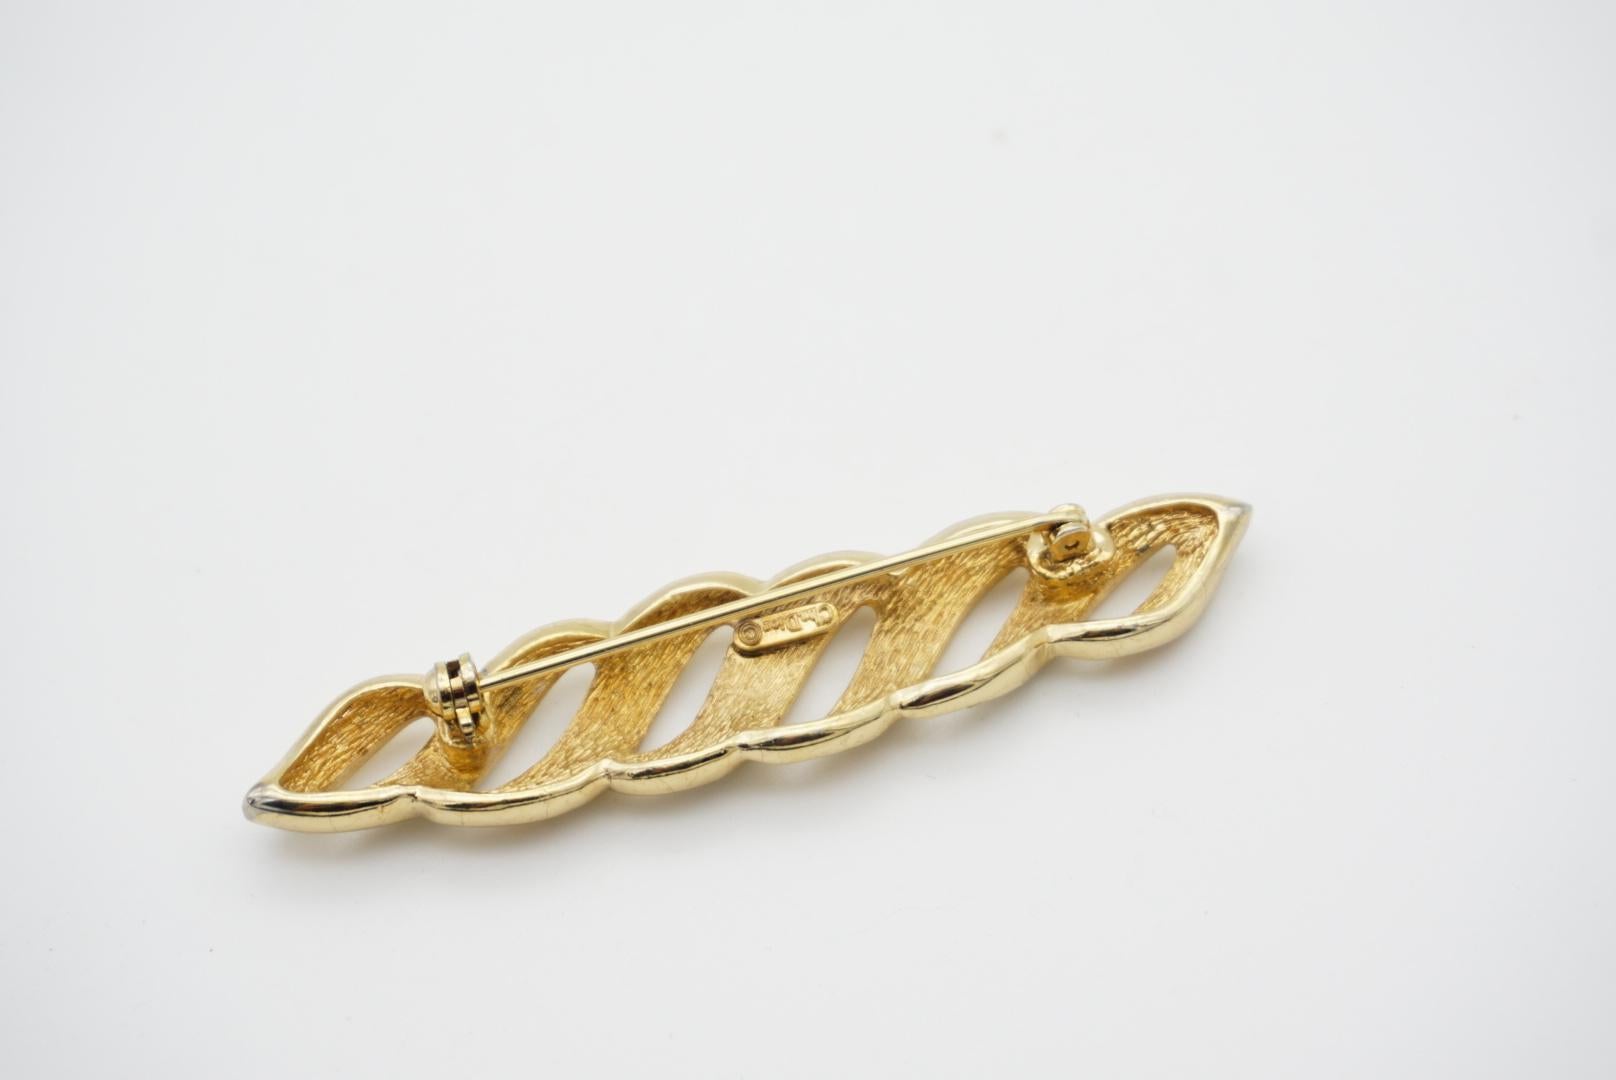 Christian Dior 1970s Vintage Long Fire Croissant Openwork Crystal Swirl Brooch For Sale 5